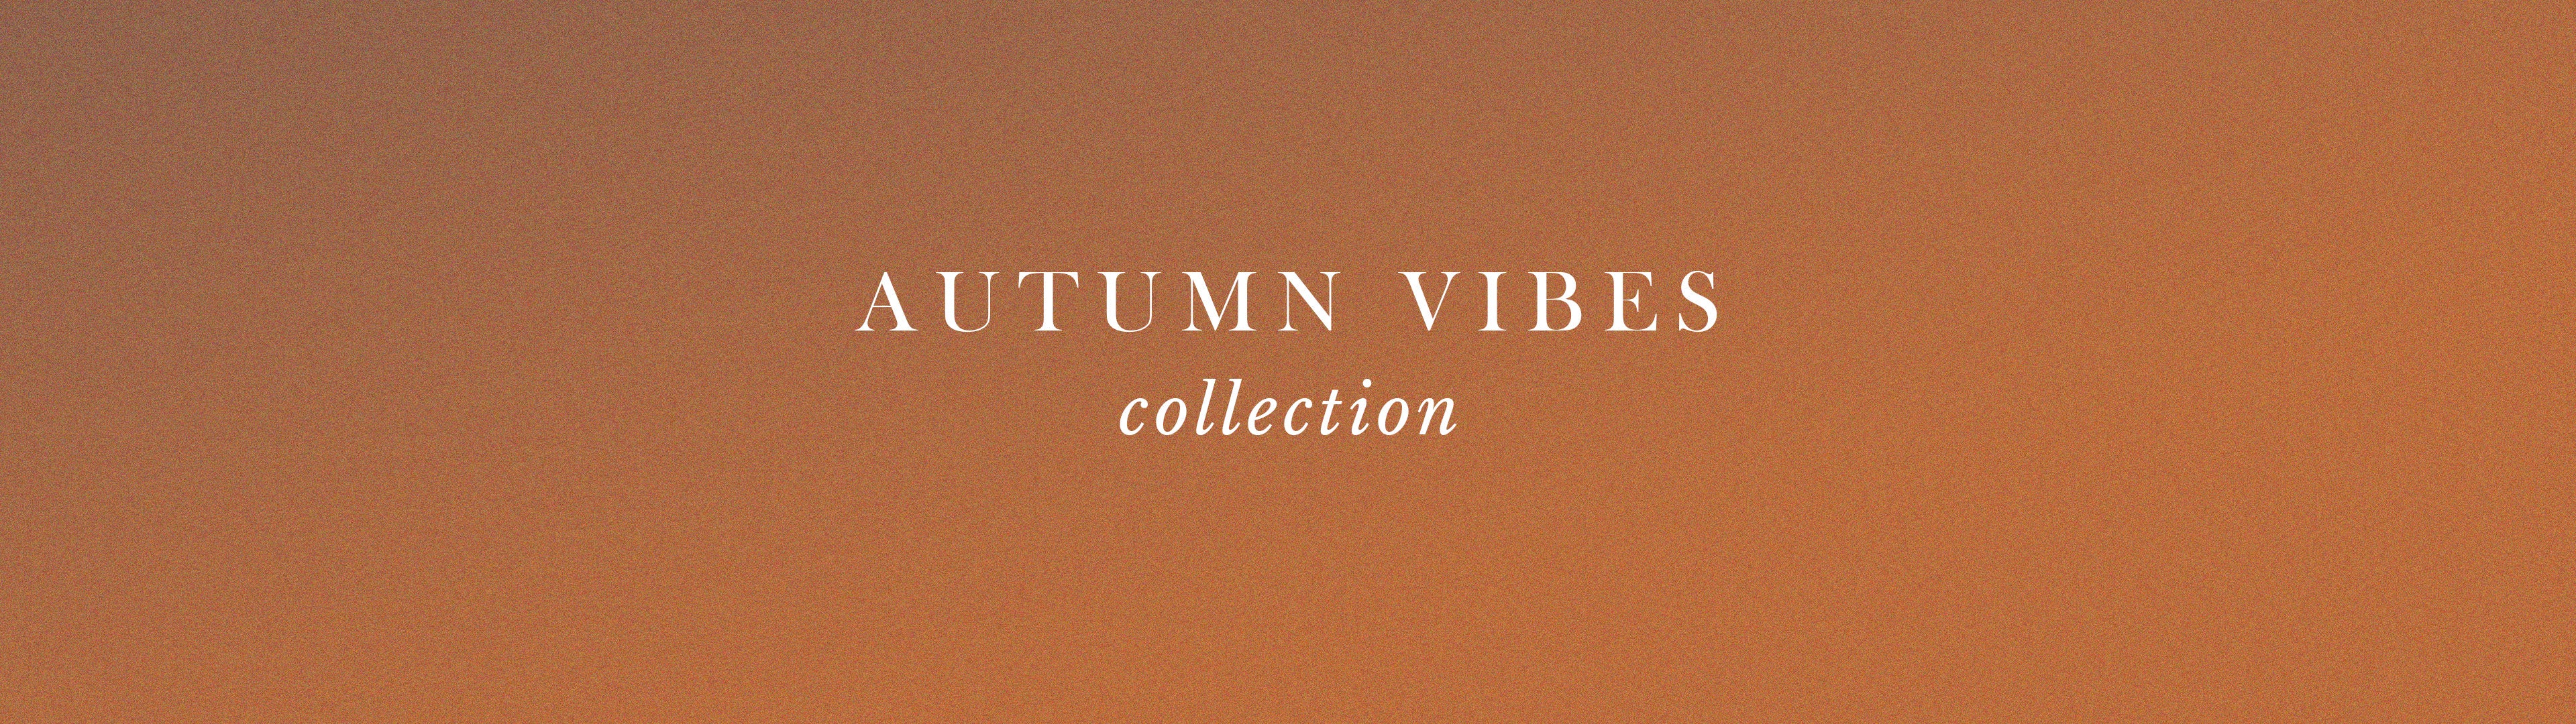 AUTUMN VIBES COLLECTION